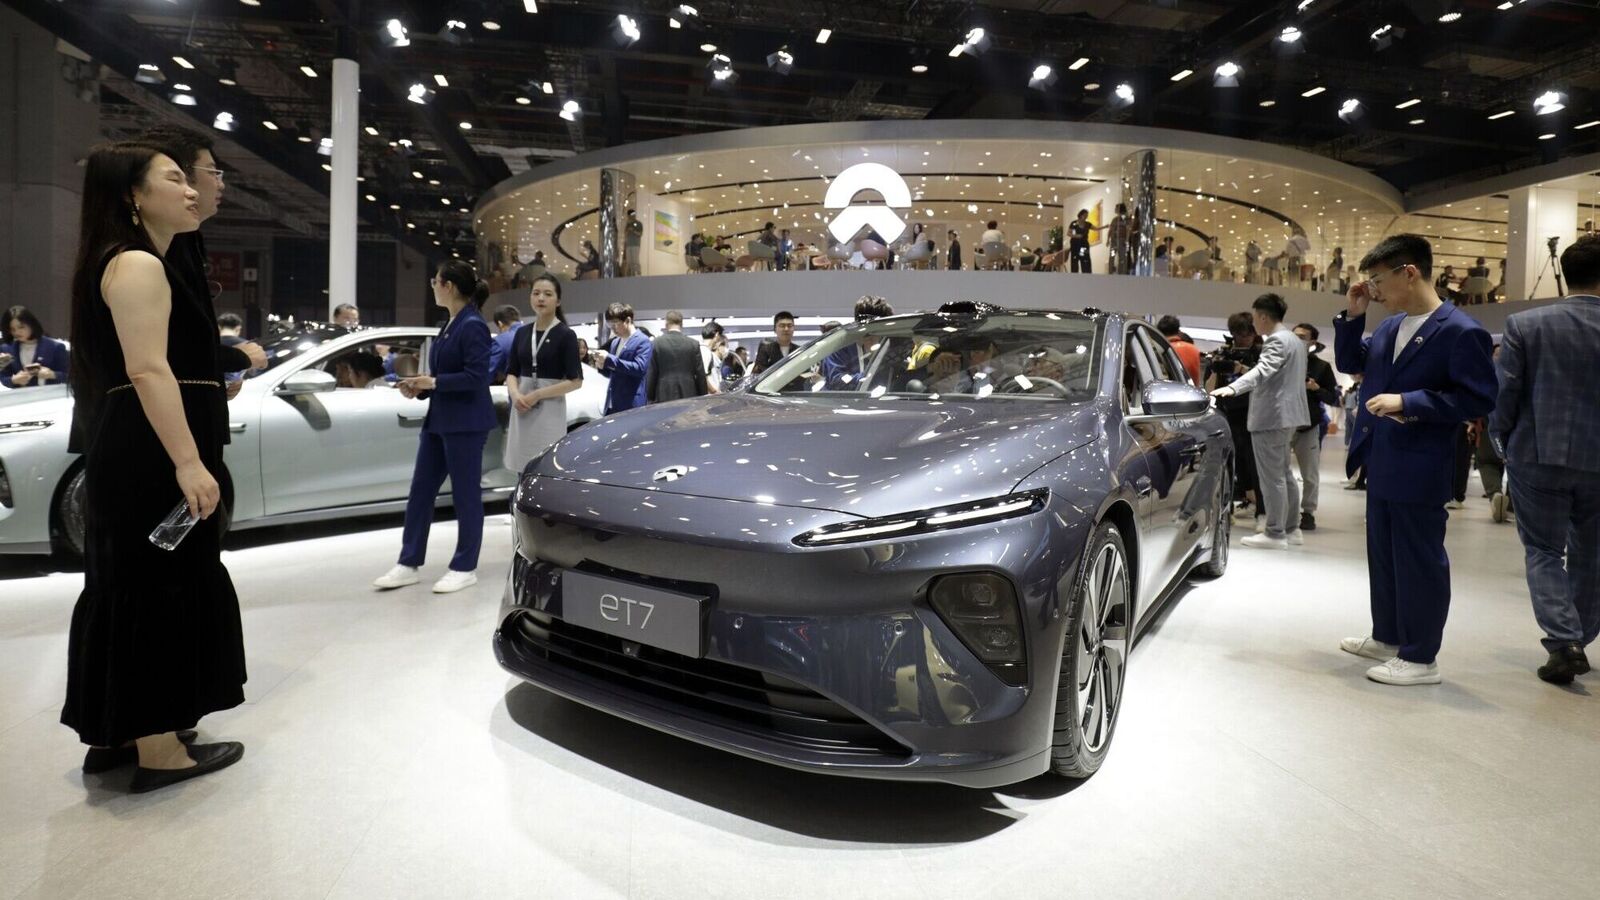 China’s EV dominance takes center stage at Shanghai auto show Bergip Cars